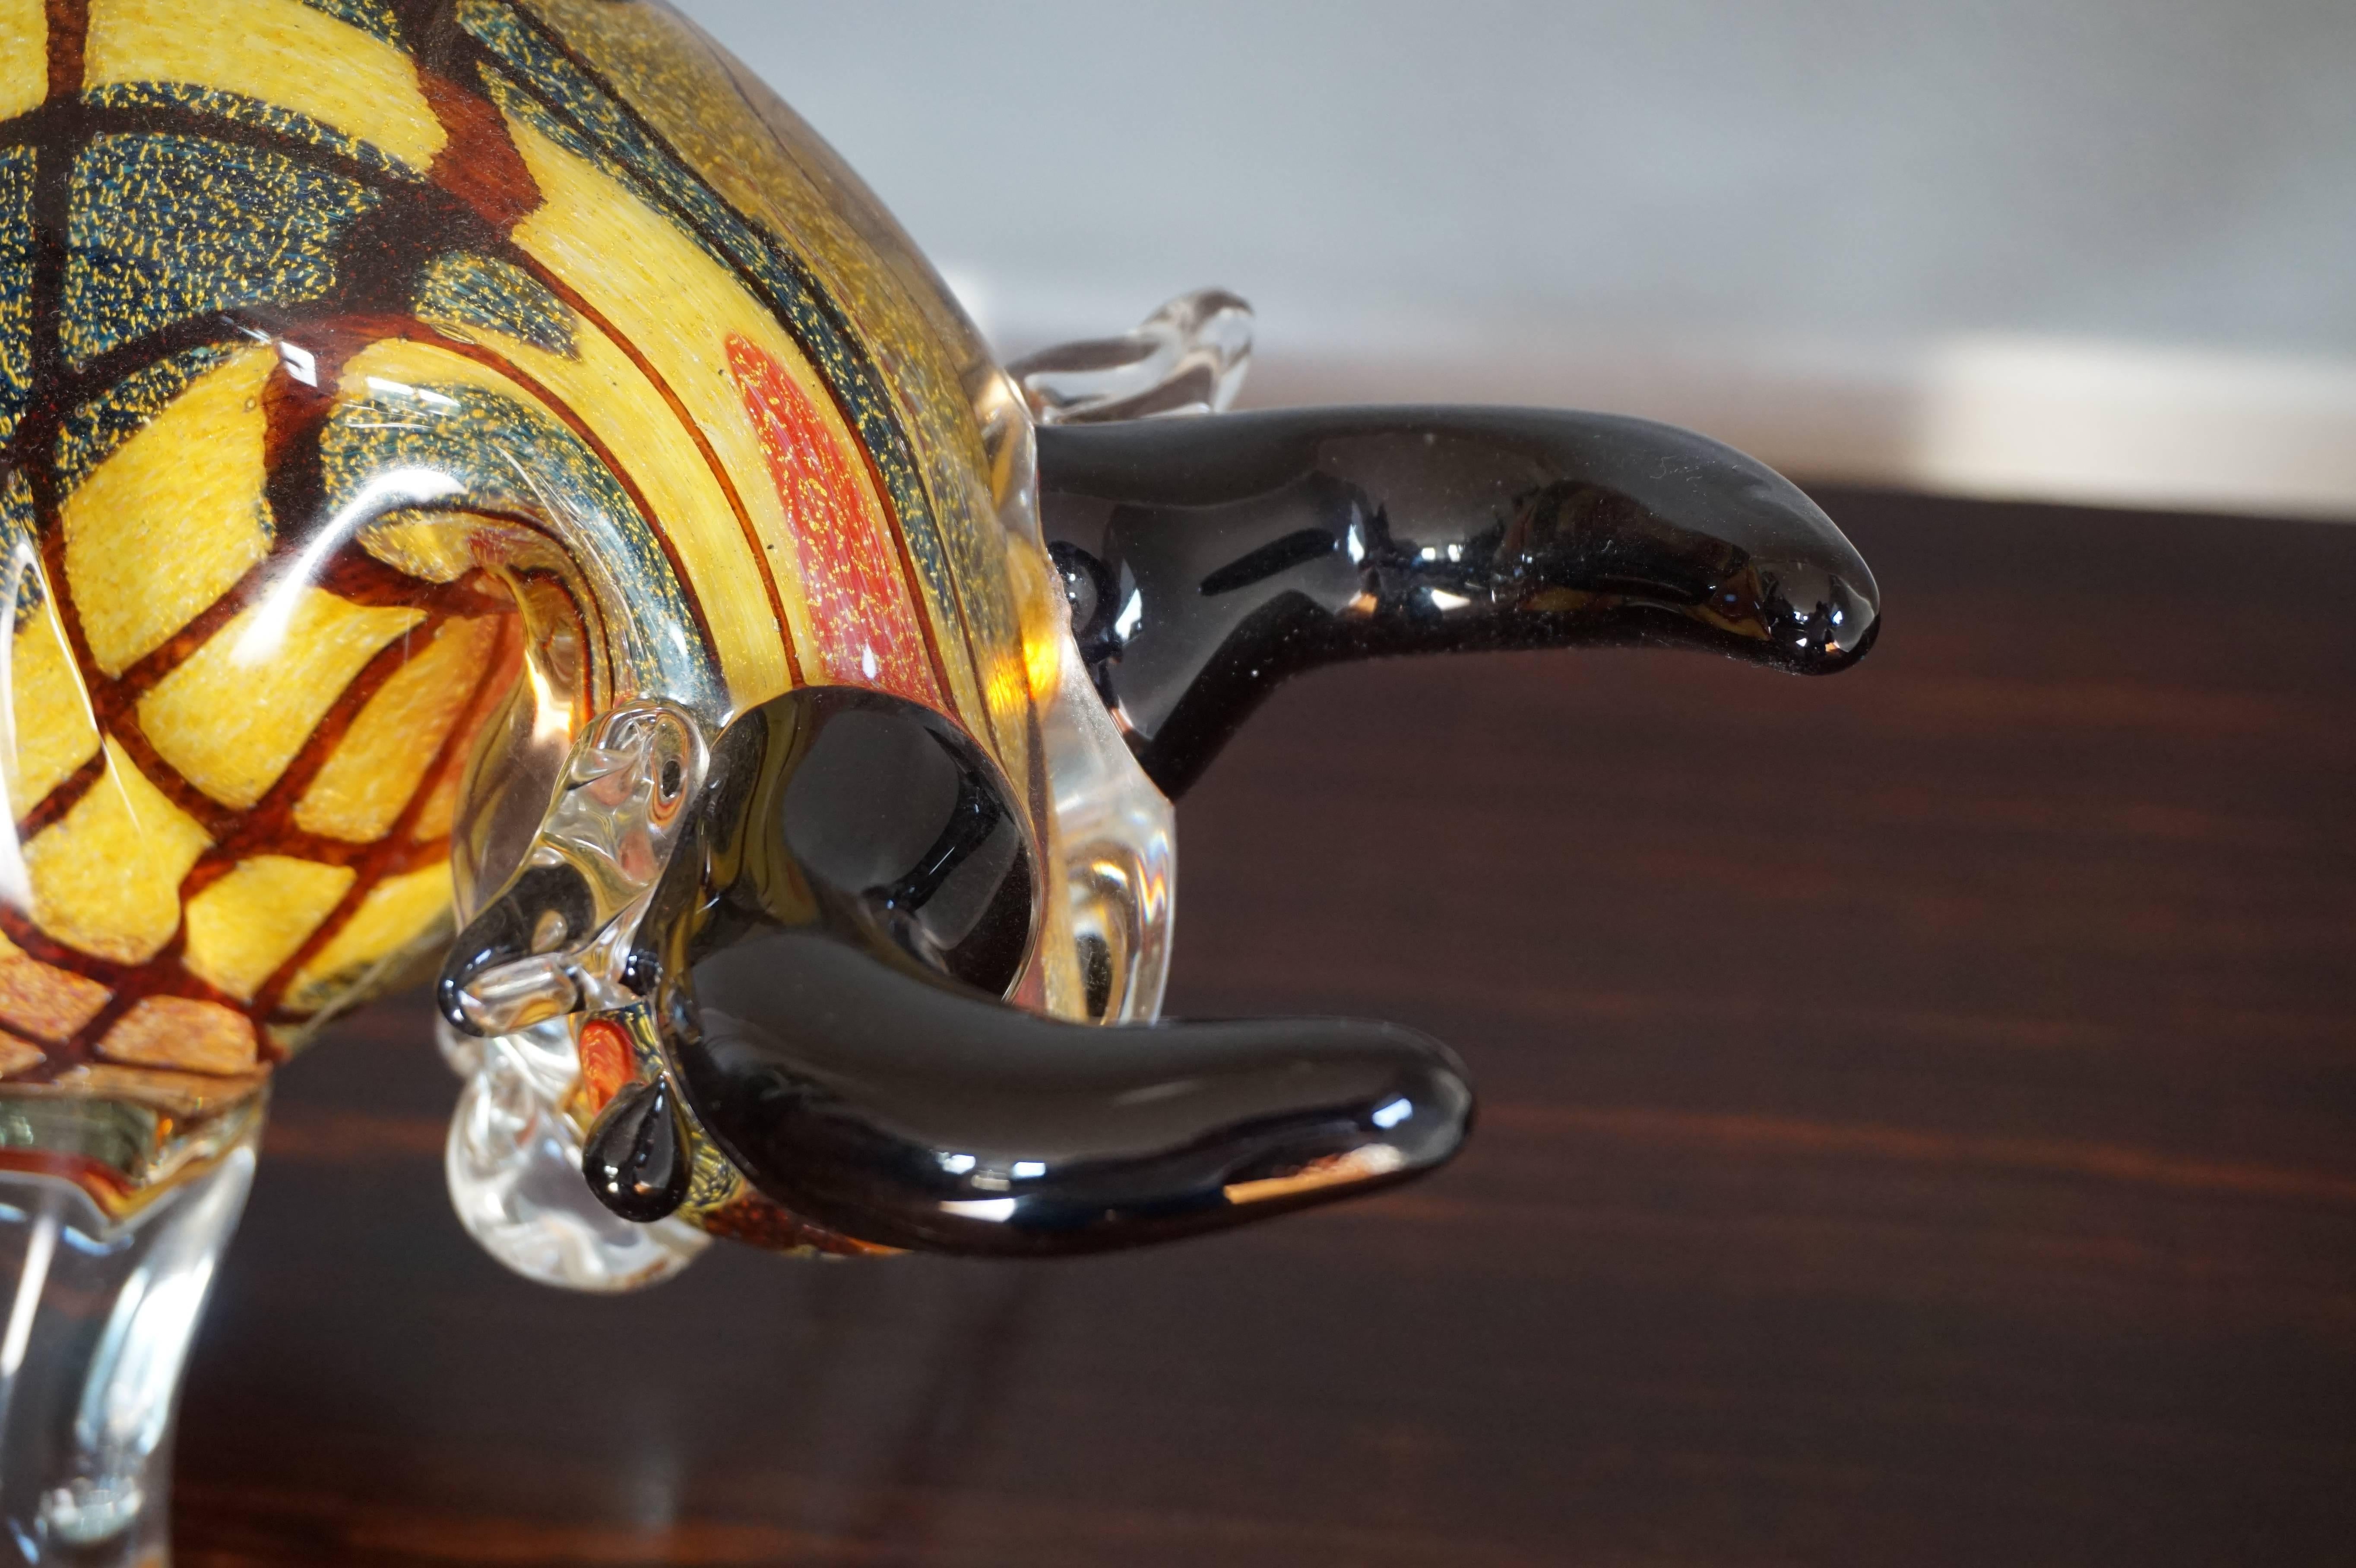 Handcrafted and gorgeous work of glass art from Italy.

For the lovers of Italian glass art we also have this stunning glass, bull sculpture. This piece would be particularly nice to give to somebody with a Taurus sign. With the holiday season on